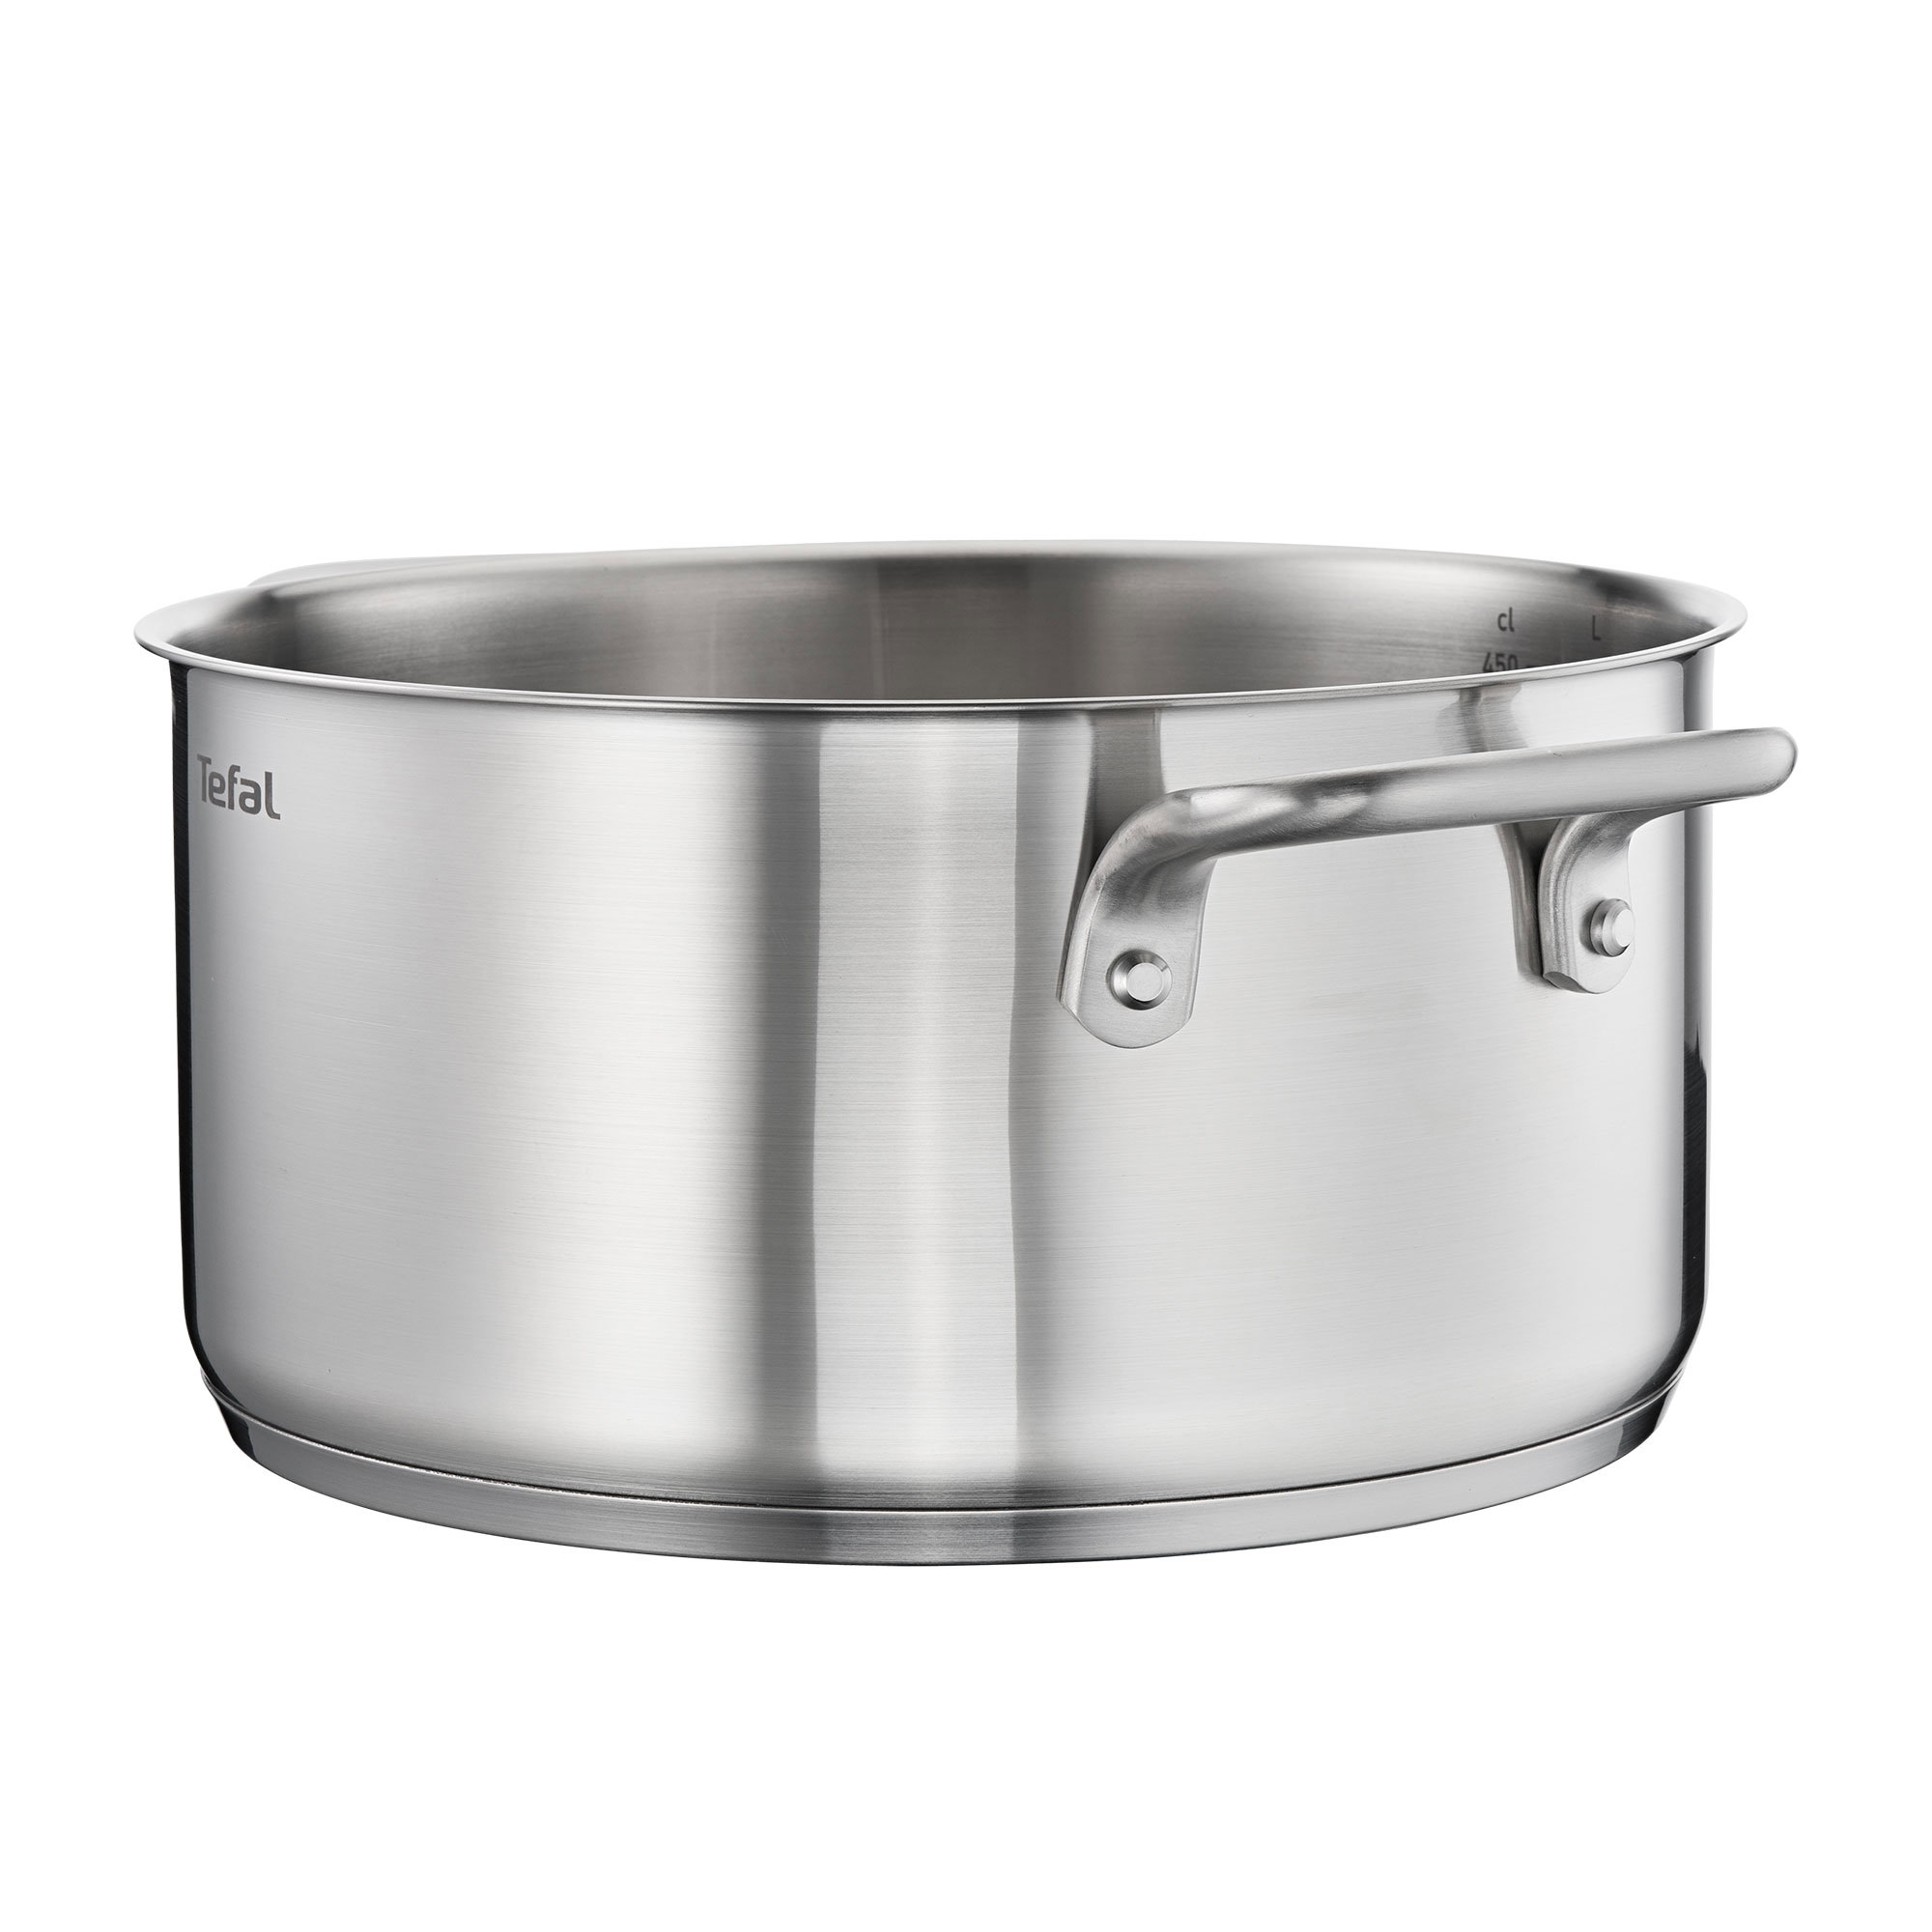 Tefal Virtuoso Stainless Steel Stewpot 24cm - 5.4L Image 2